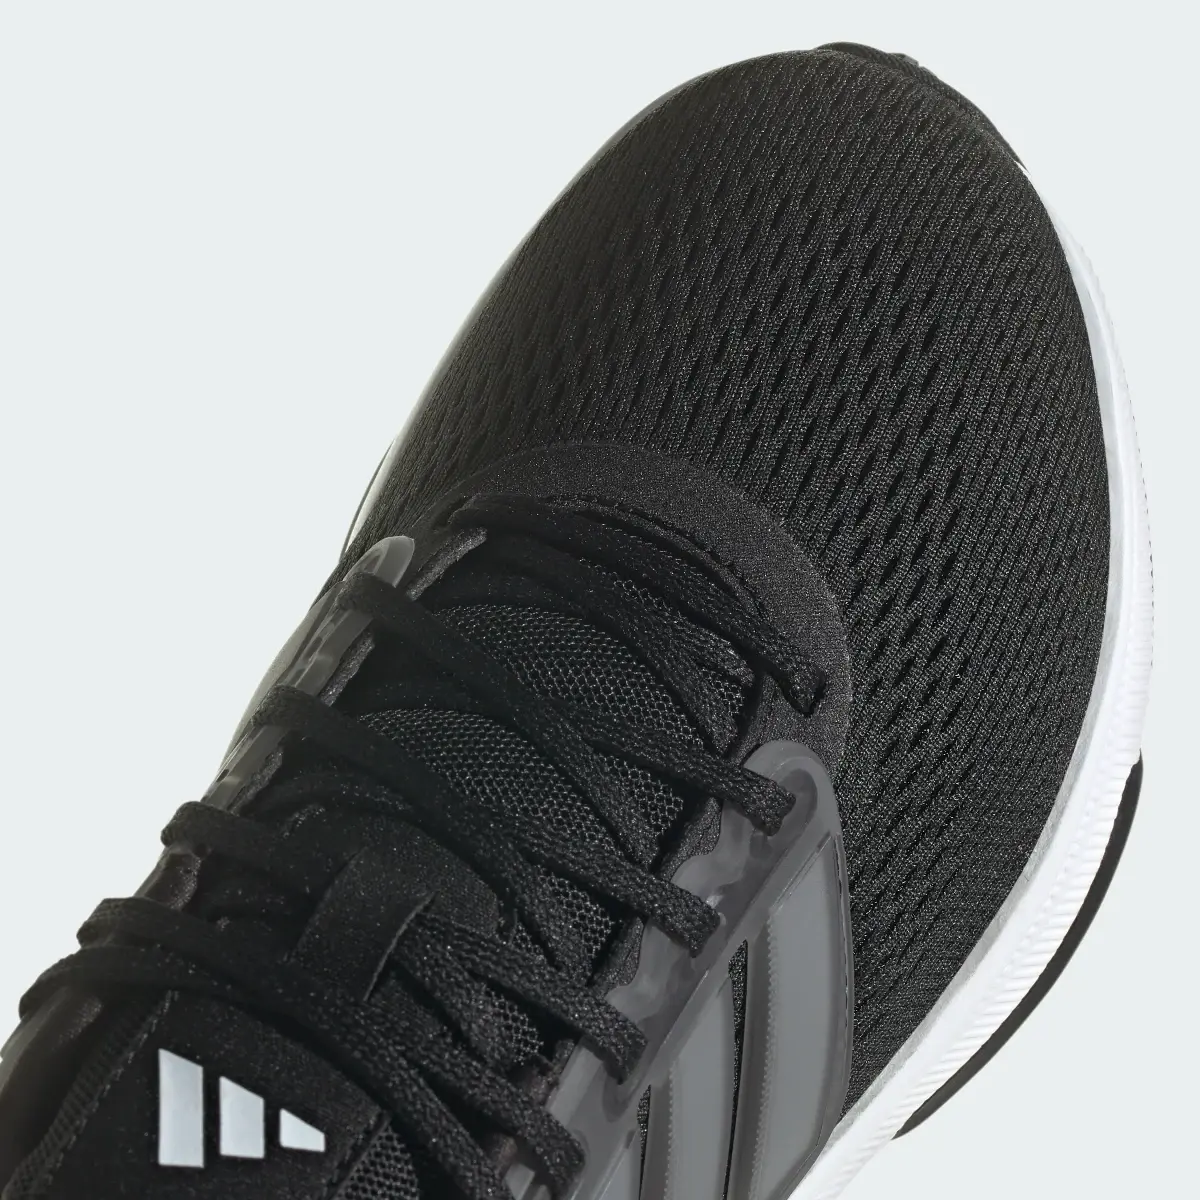 Adidas Ultrabounce Wide Shoes. 3